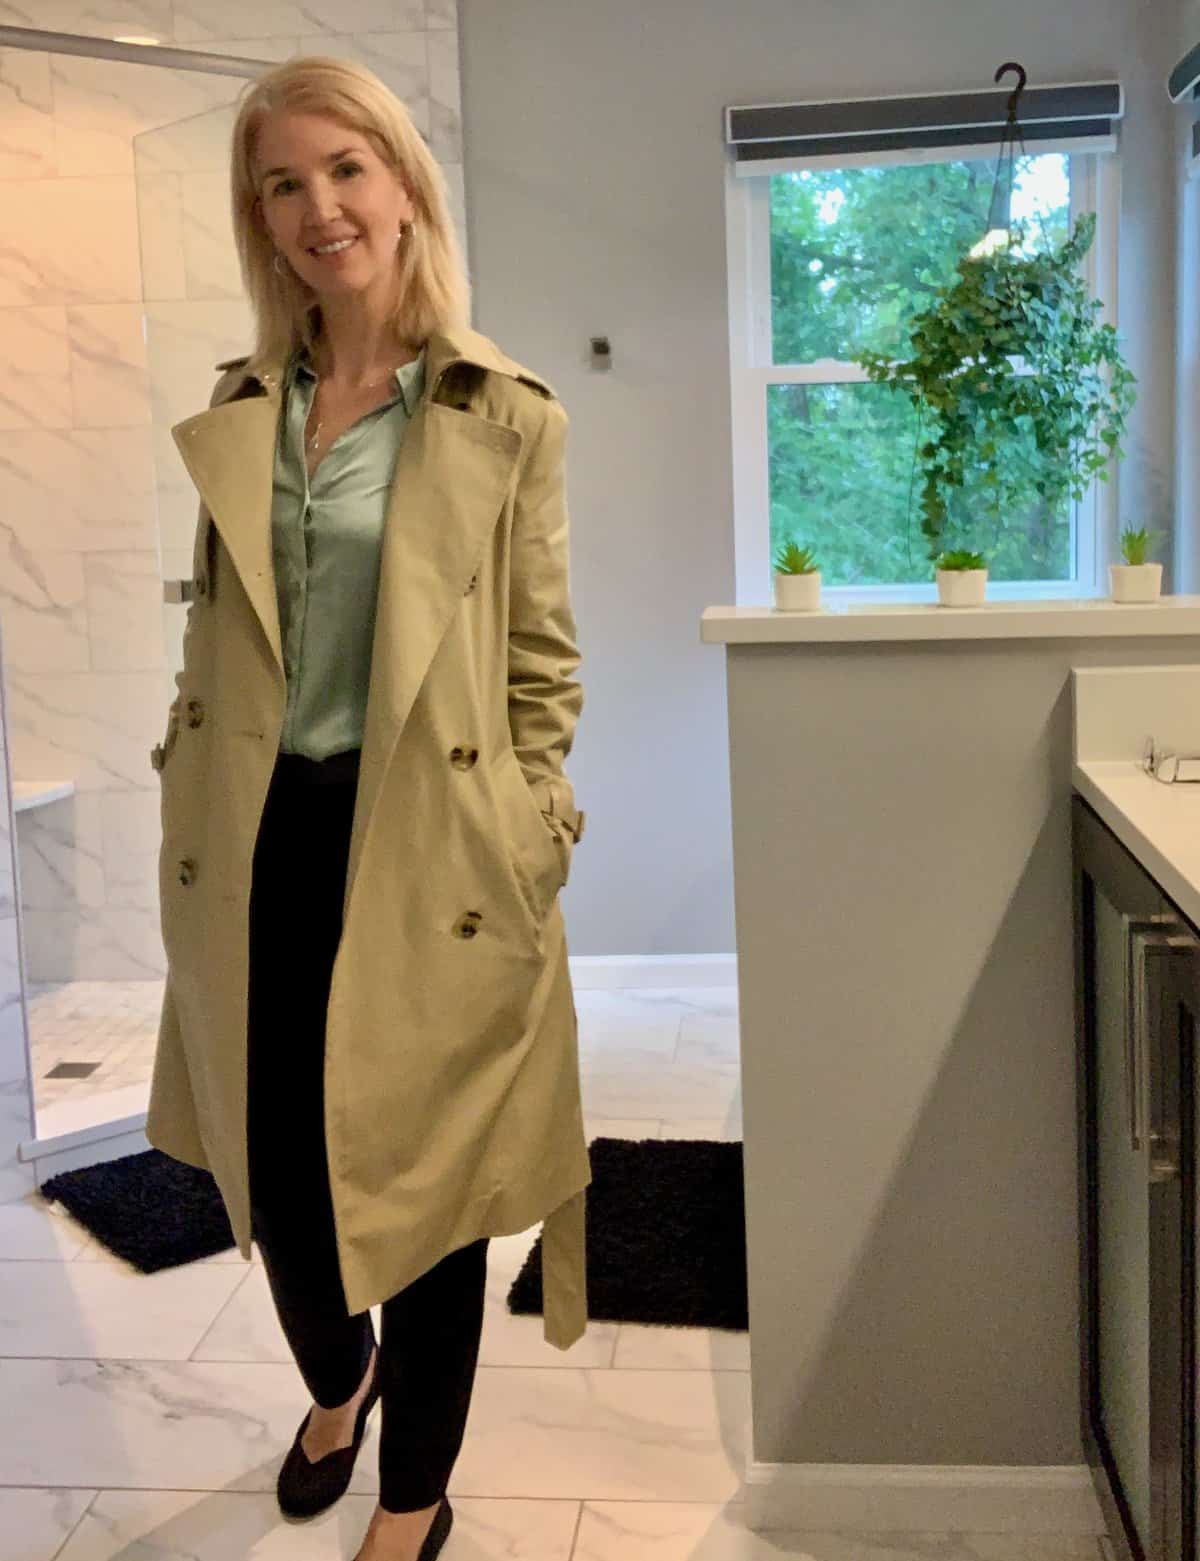 Woman wearing black trousers and black flats, a satin sage shirt and a tan trench coat. Great professional fall capsule wardrobe pieces.